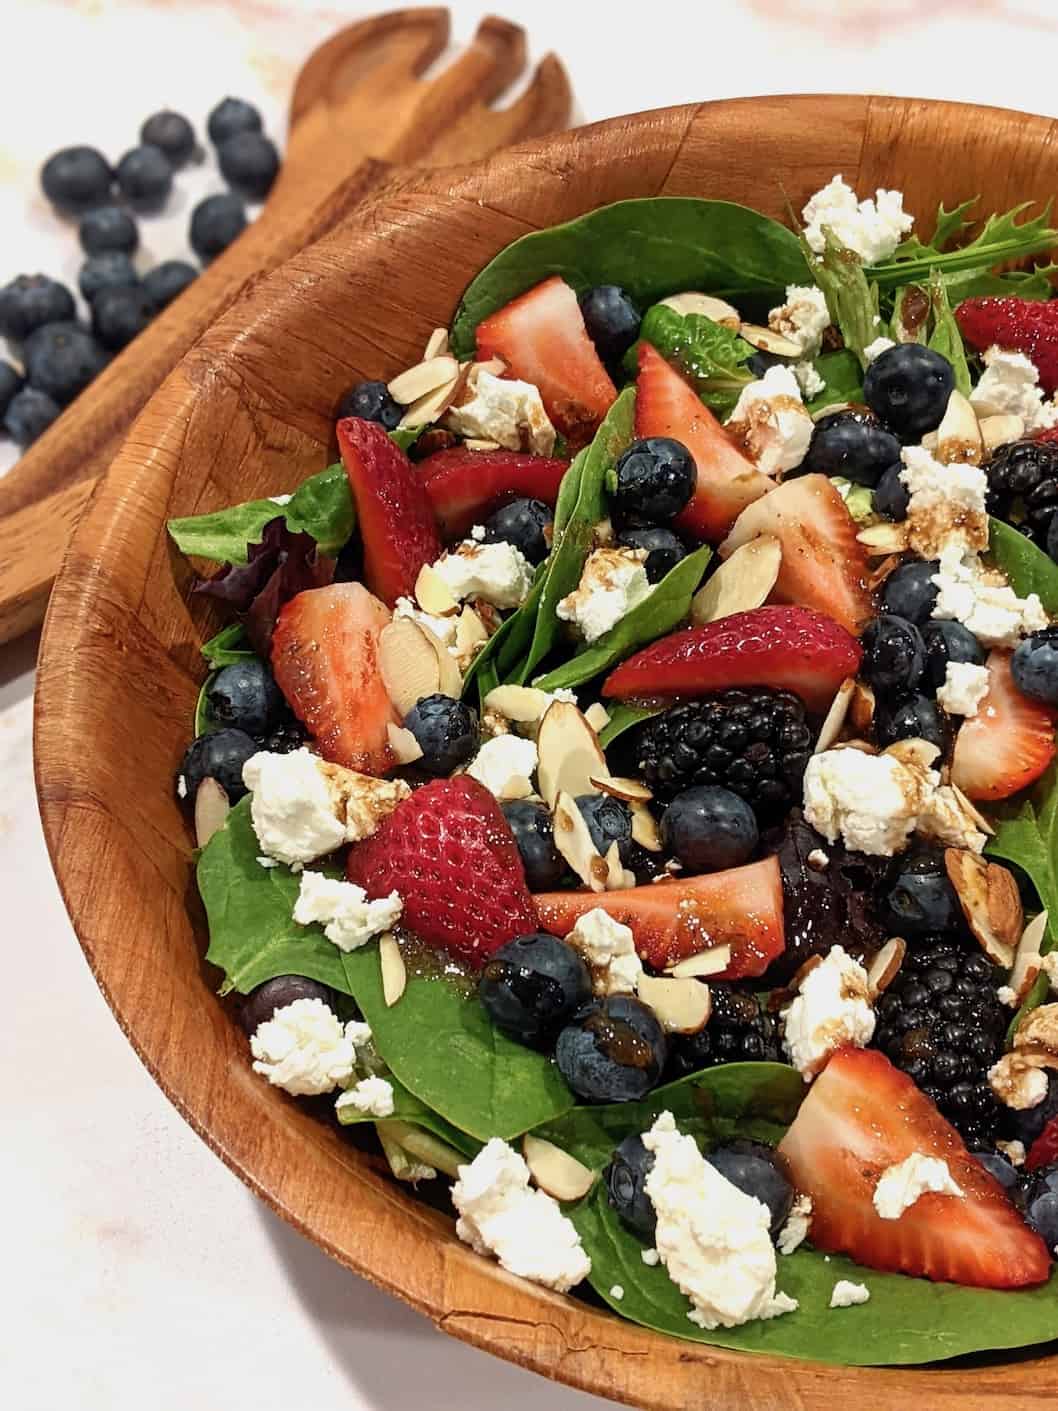 Mixed Berry Salad With Balsamic Vinaigrette 3911